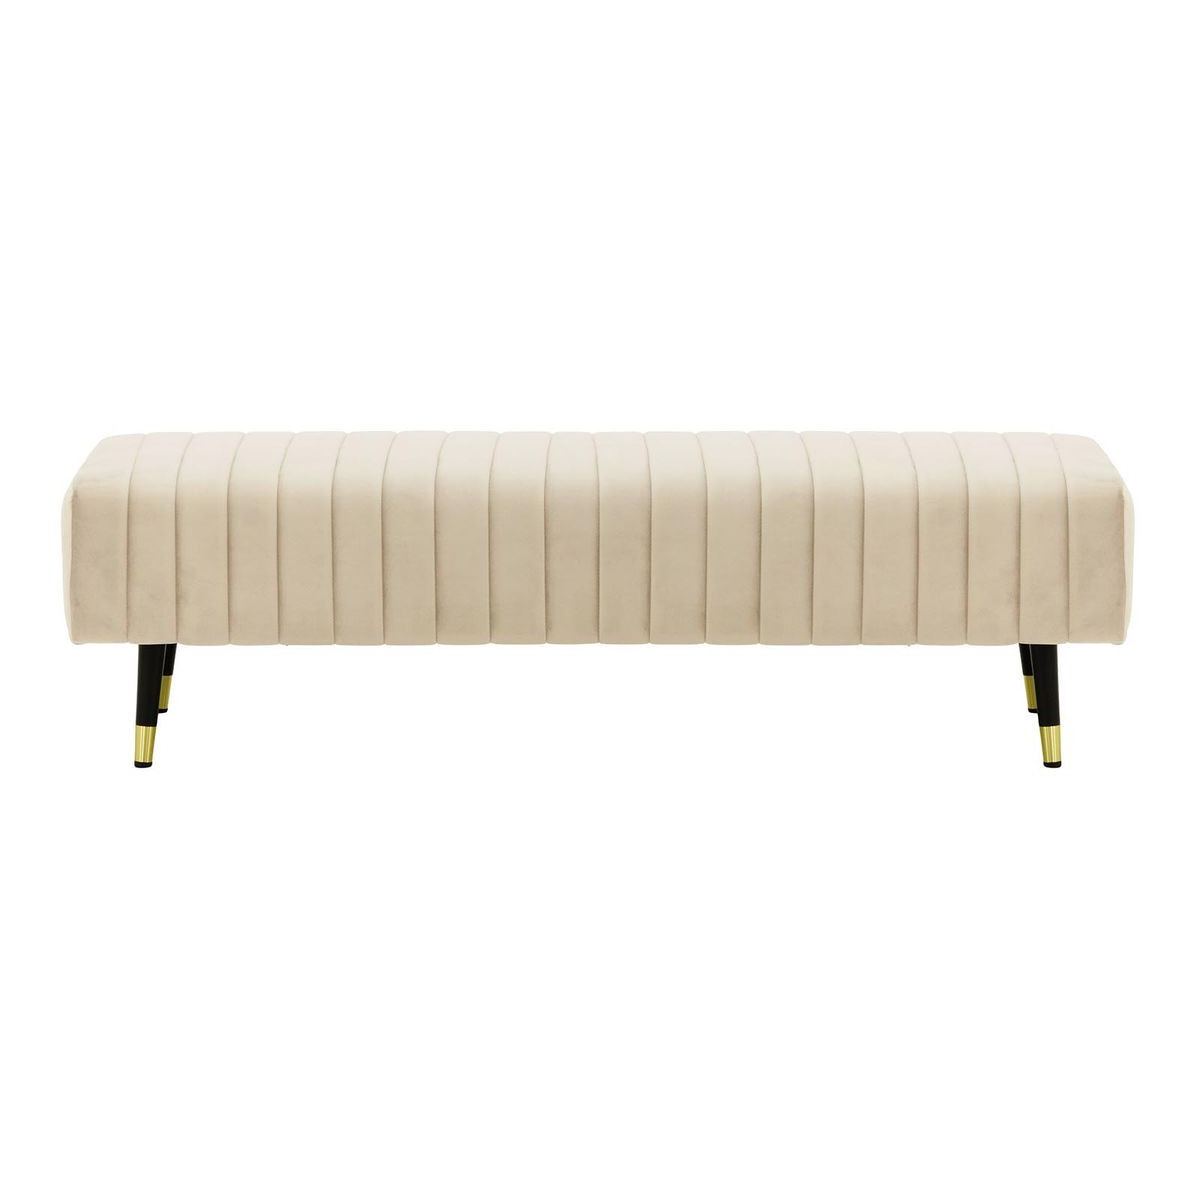 Slender Footstool with quilting, light beige - image 1